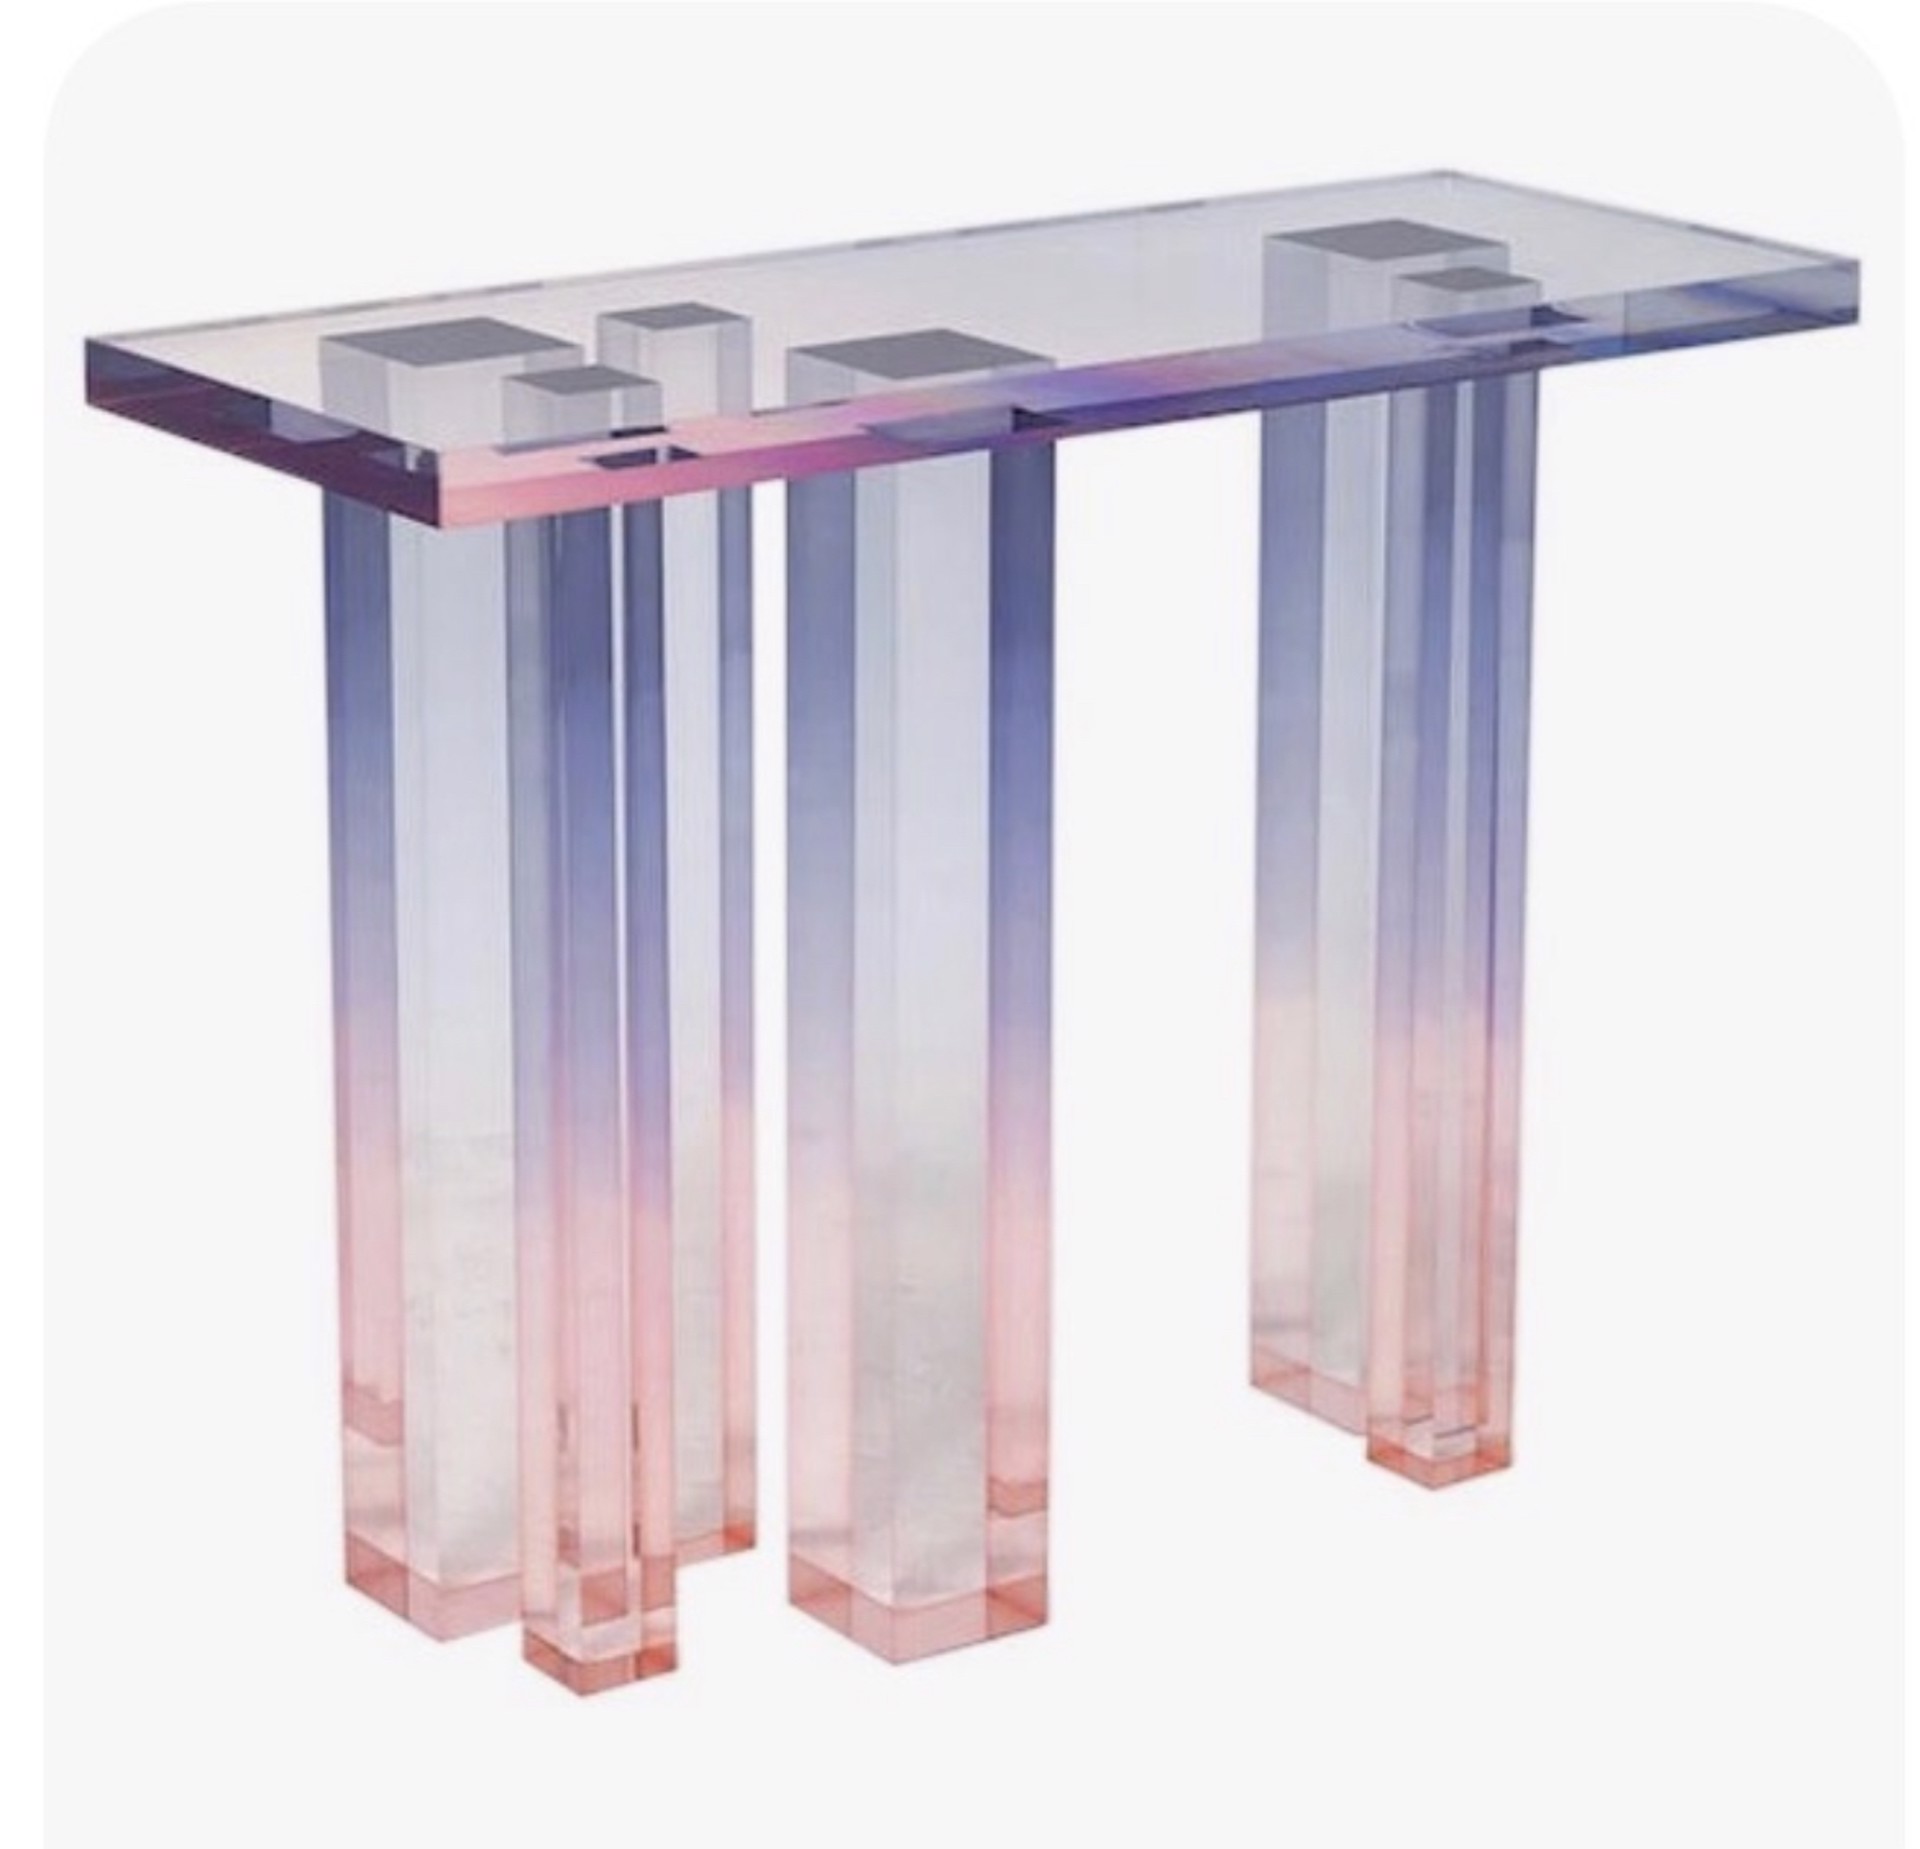 Acrylic Console Table #3. (3 pieces) by Saerom Yoon